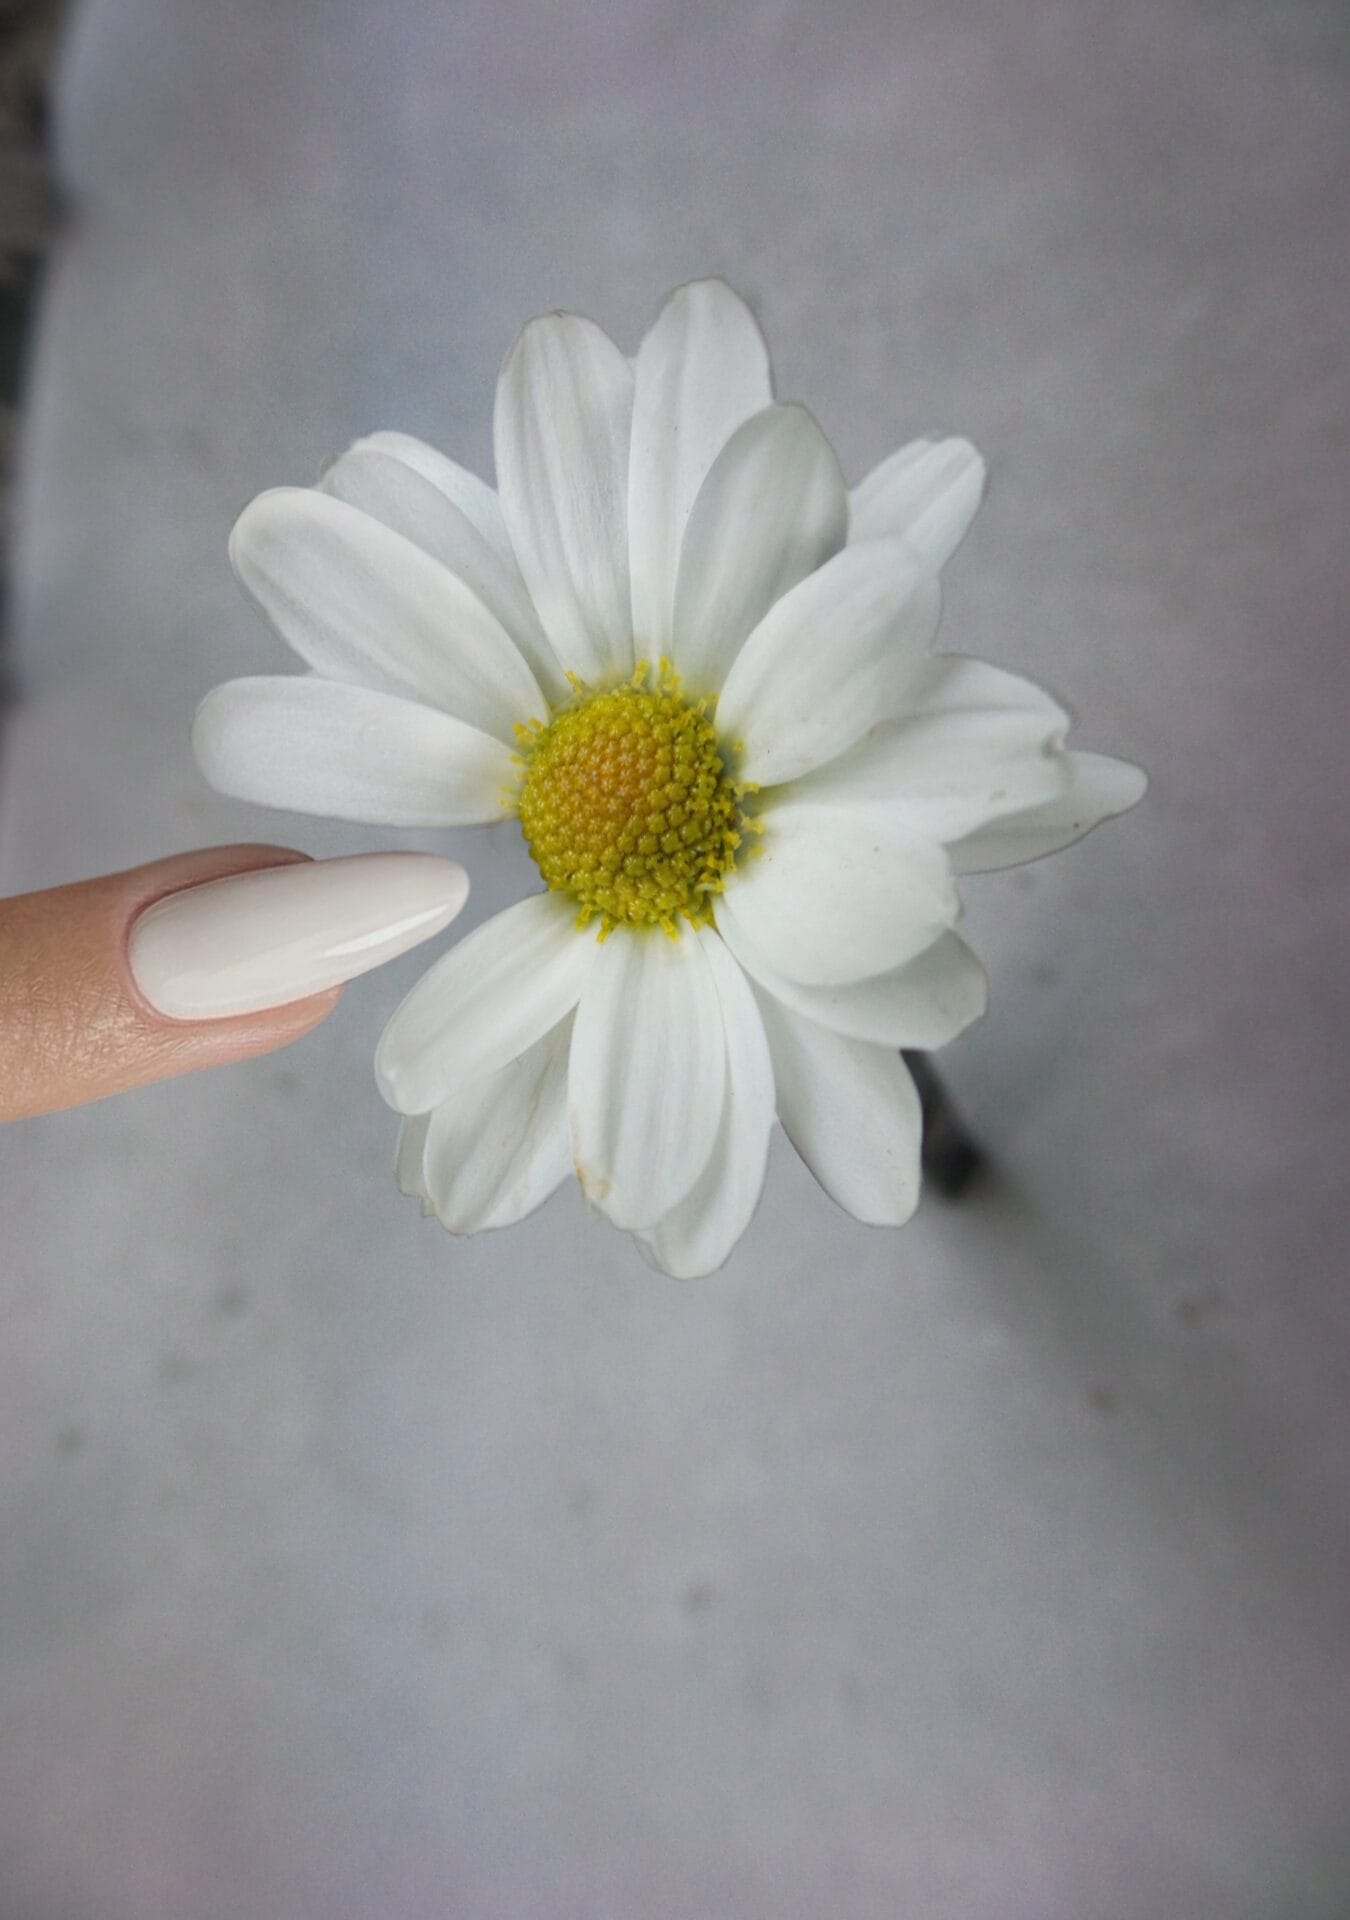 a daisy with a missing petal, which is replaced by a woman's long, white fingernail that resembles the shape of a petal